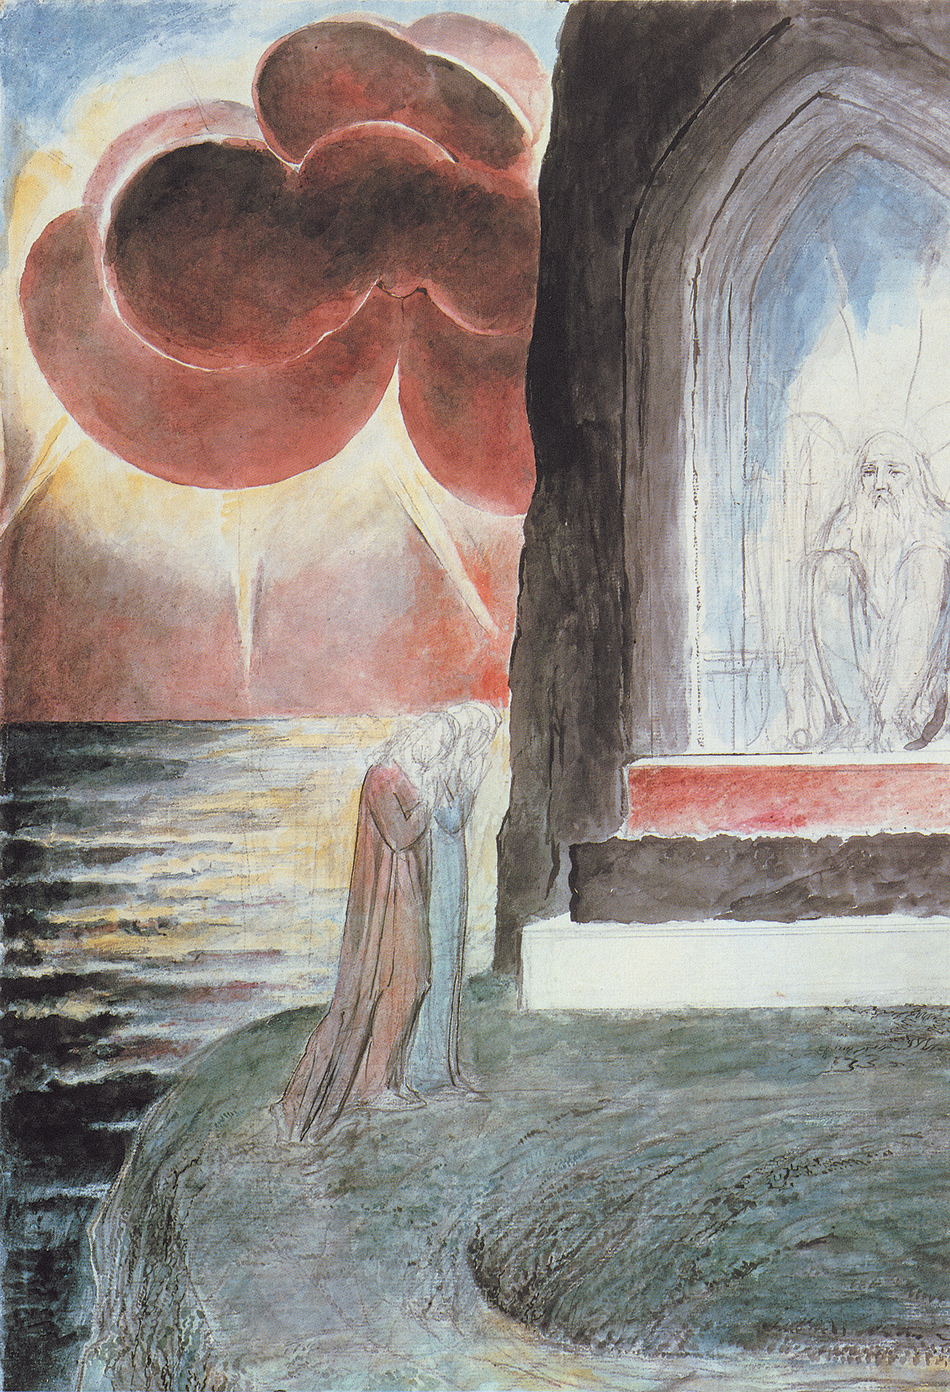 William Blake: Dante and Virgil Approaching the Angel Who Guards the Entrance of Purgatory, 1824–1827